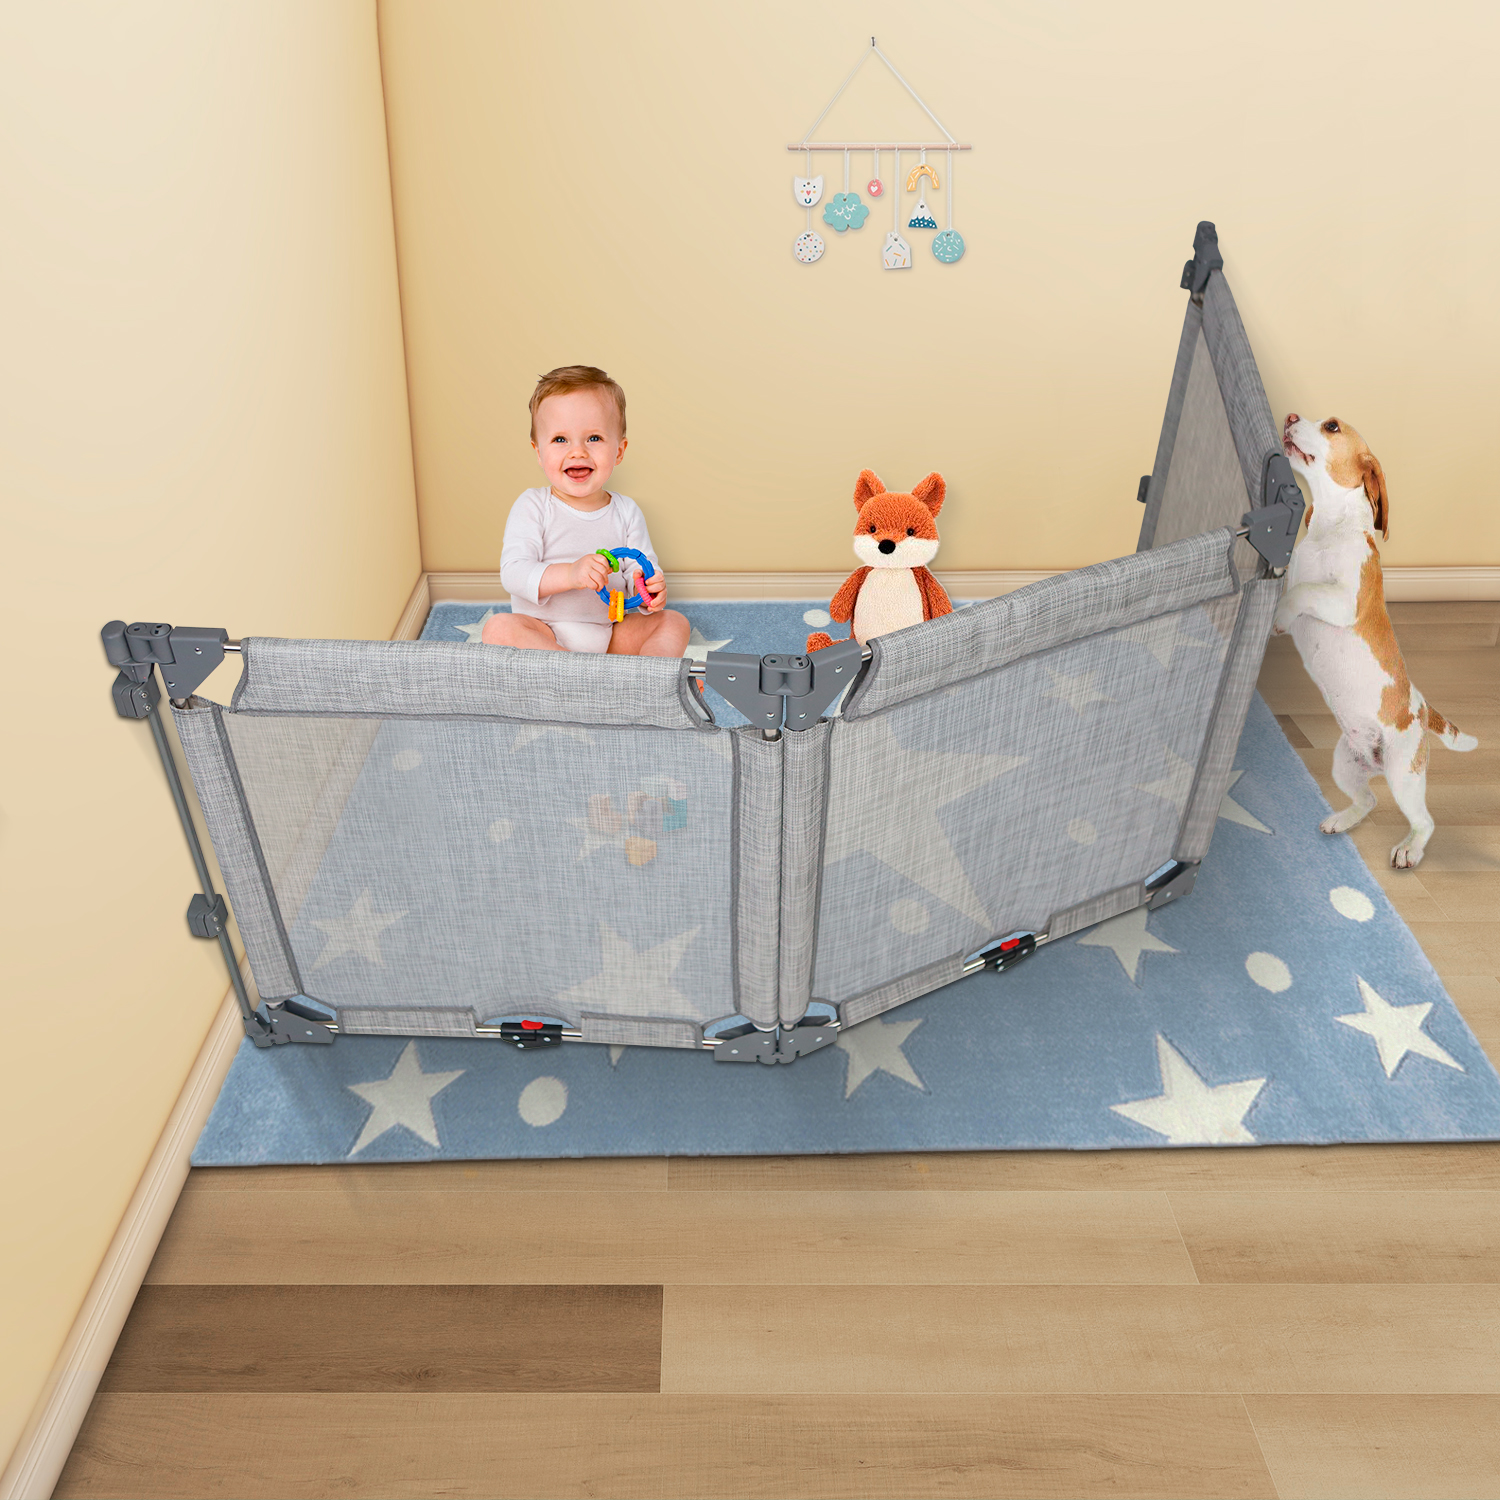 SH1.412F Foldable Safety Baby Gate Deformable Pet Safety Mesh Gate Add Any Panels Safety Gate